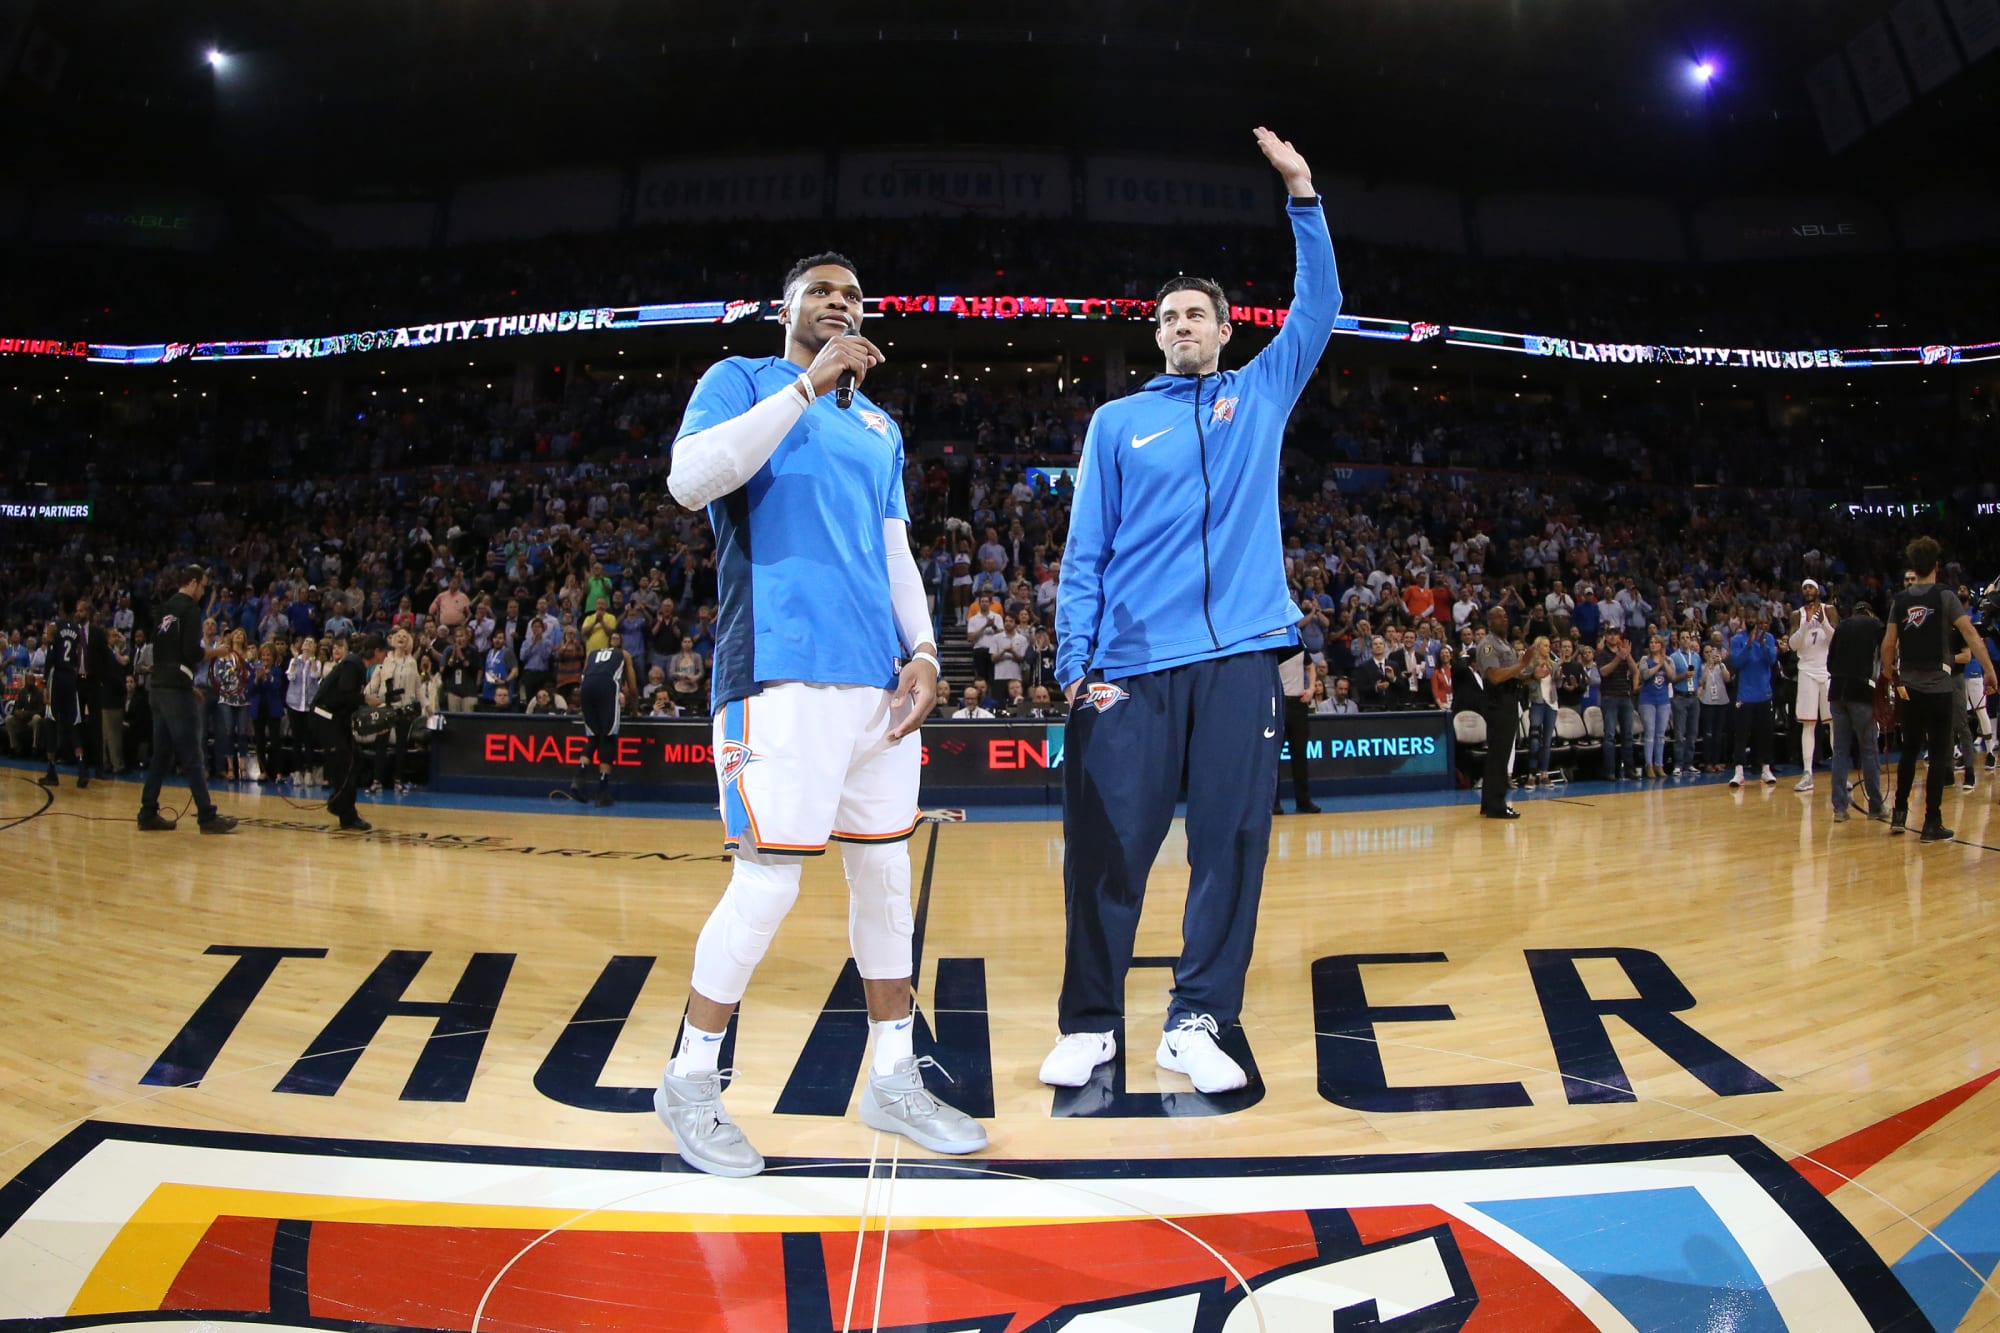 3 Jersey Numbers That The Oklahoma City Thunder Should Retire